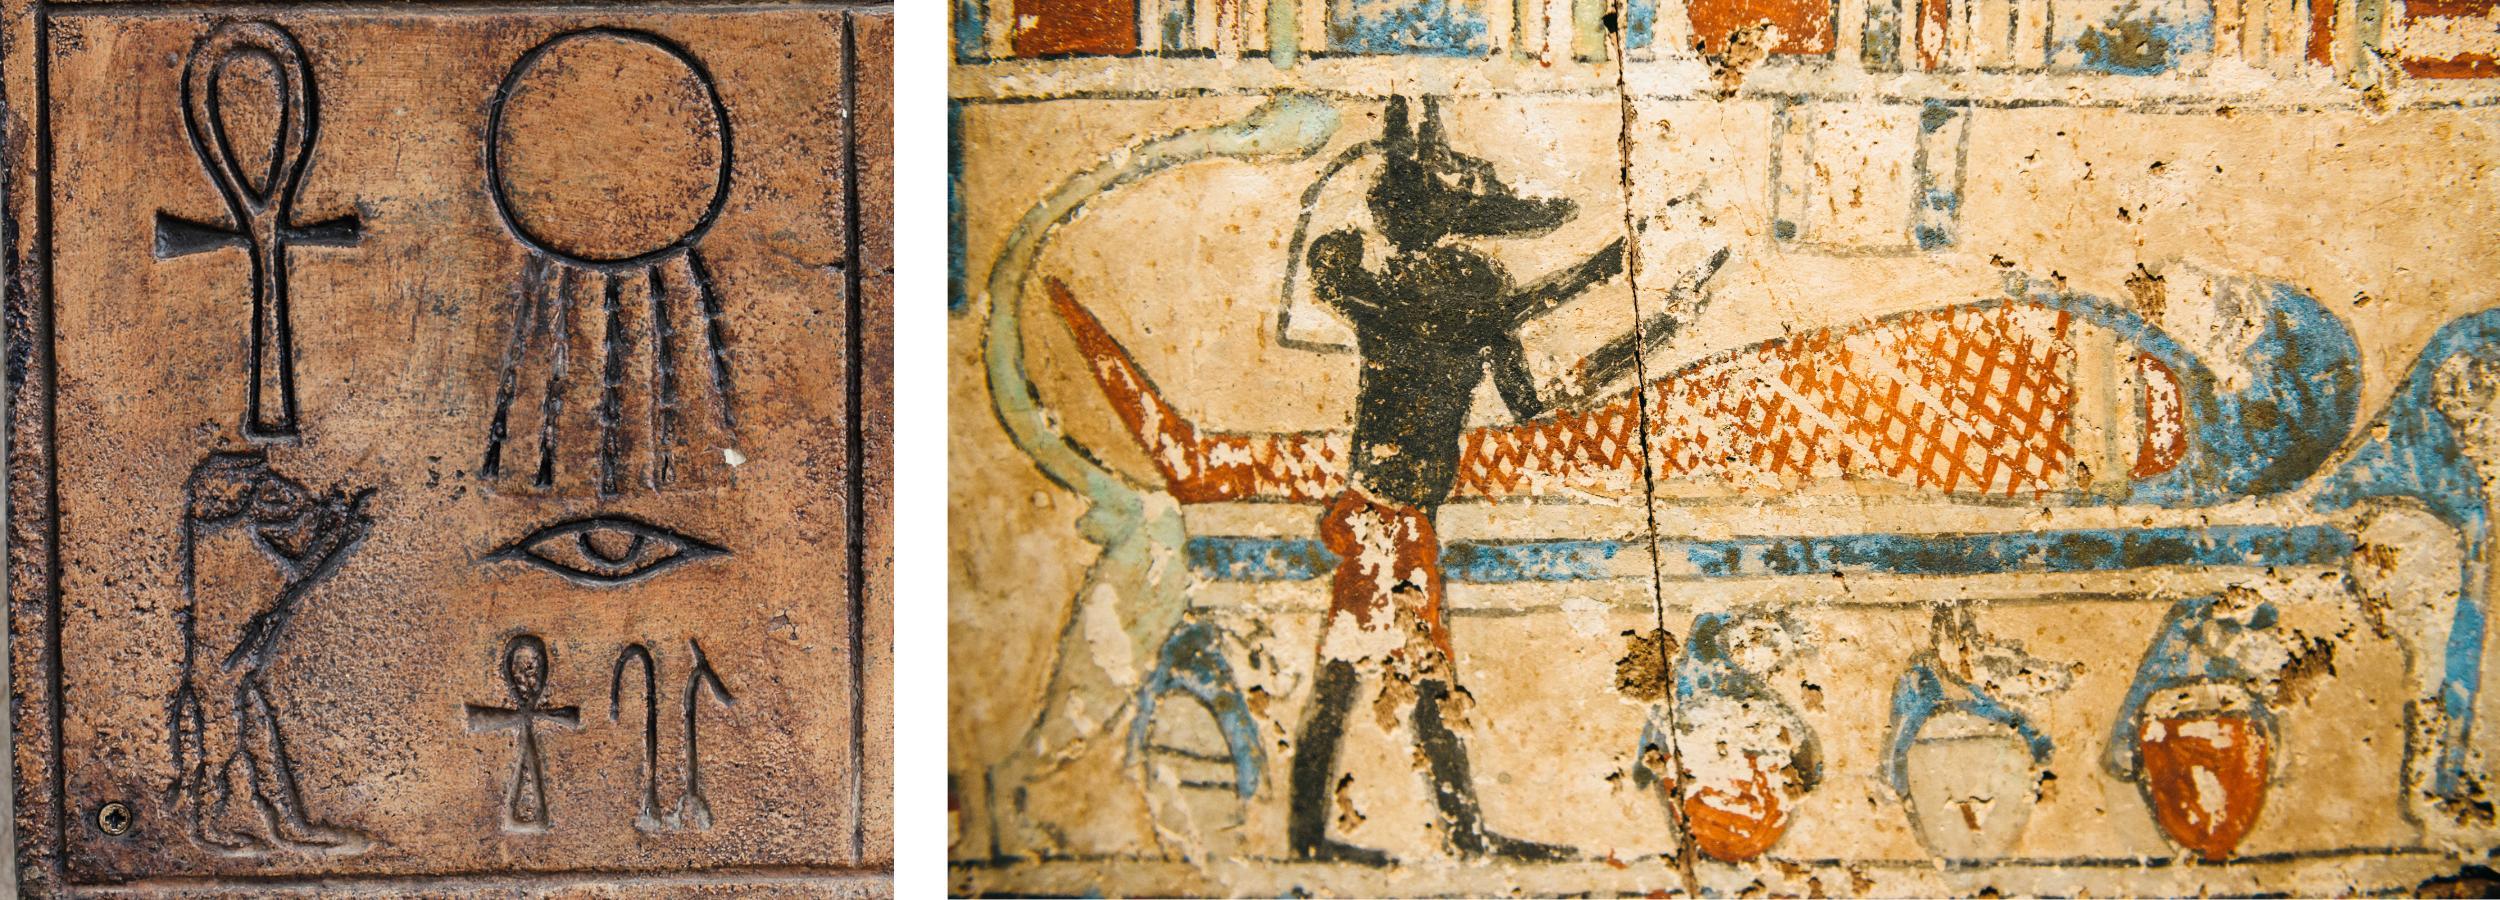 Hieroglyphs with key of life and a painting of a tomb wall